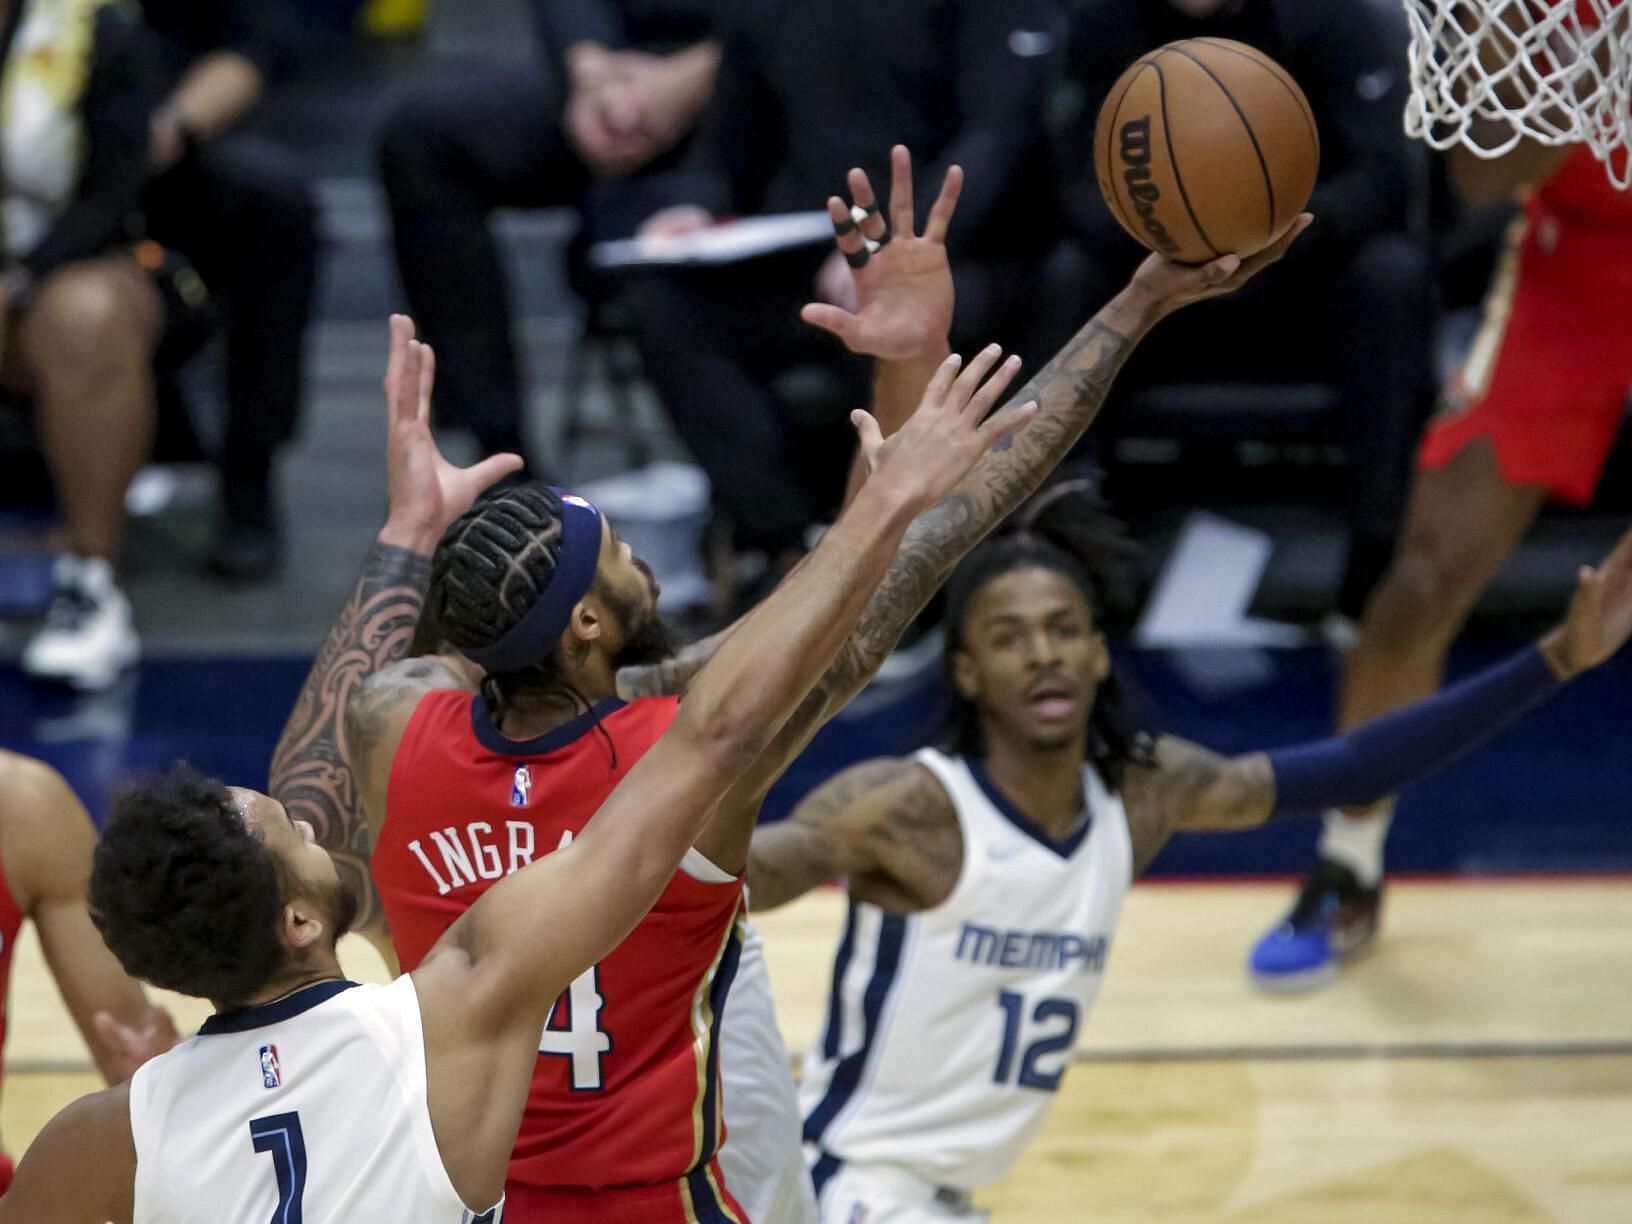 The New Orleans Pelicans and Memphis Grizzlies will meet for the fourth and last time this season on Saturday. [Photo: NOLA.com]